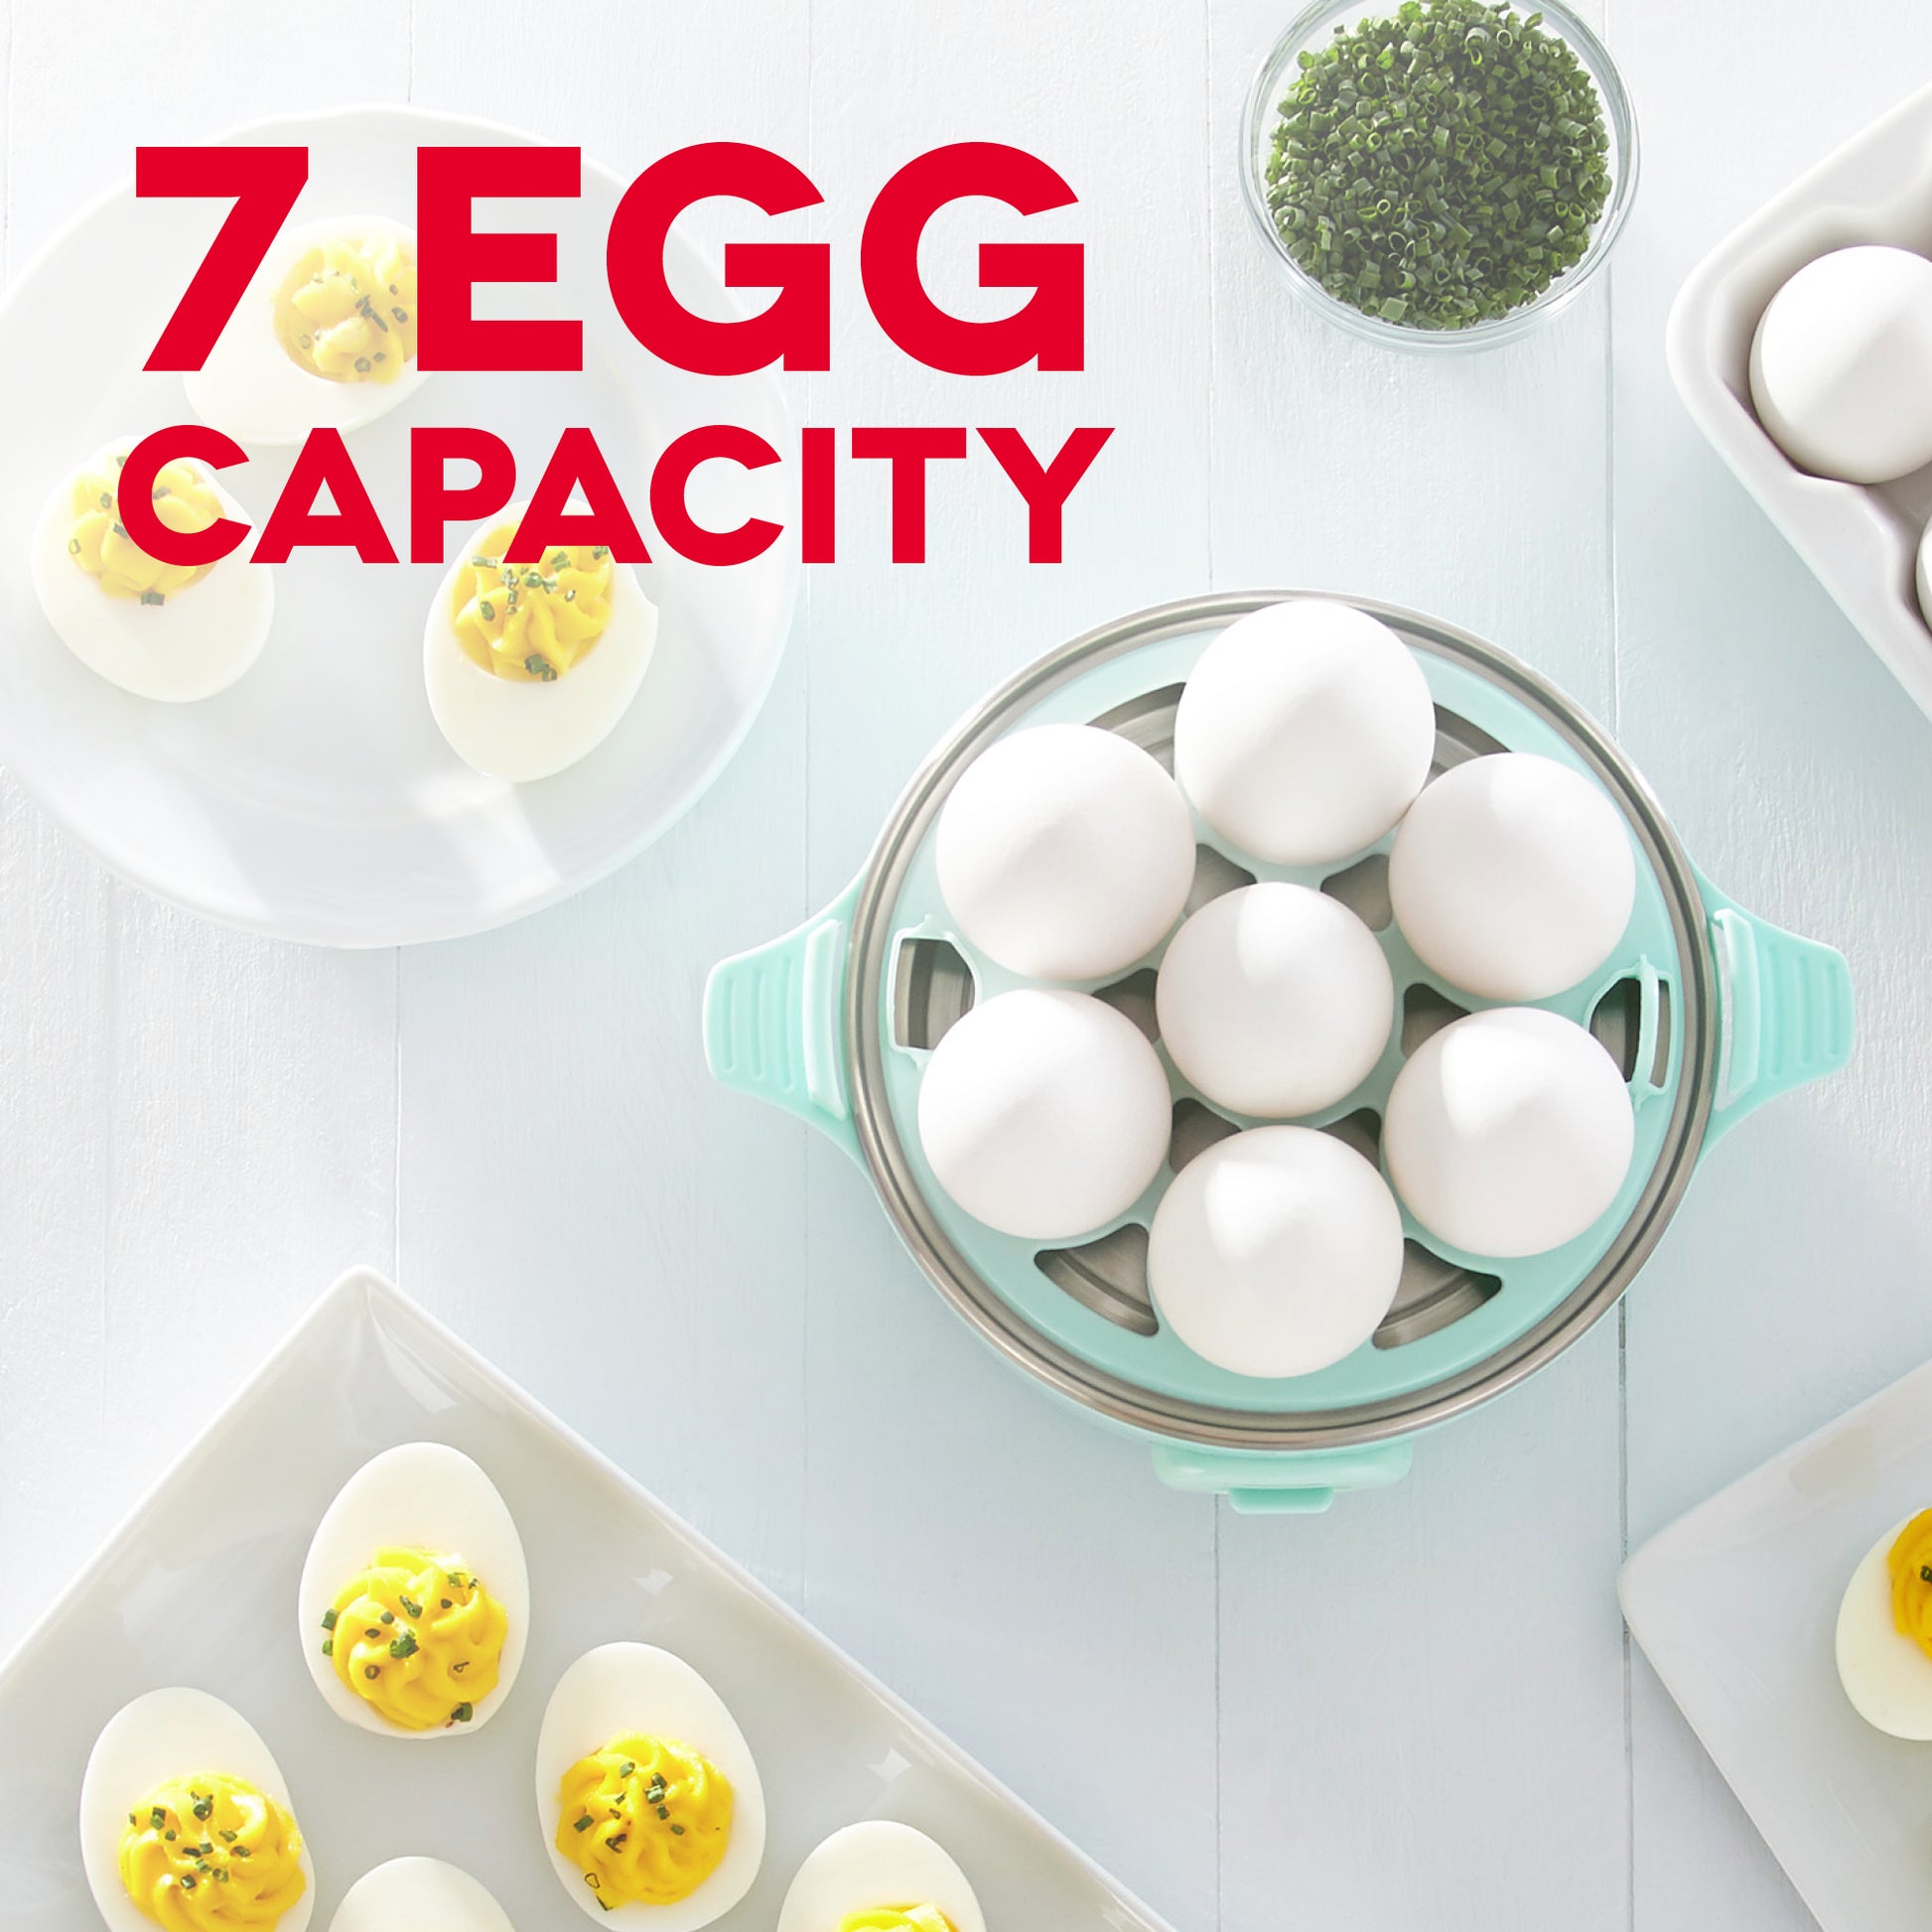 Rise By Dash Egg Cooker: 7 Egg Capacity Electric Egg Cooker for